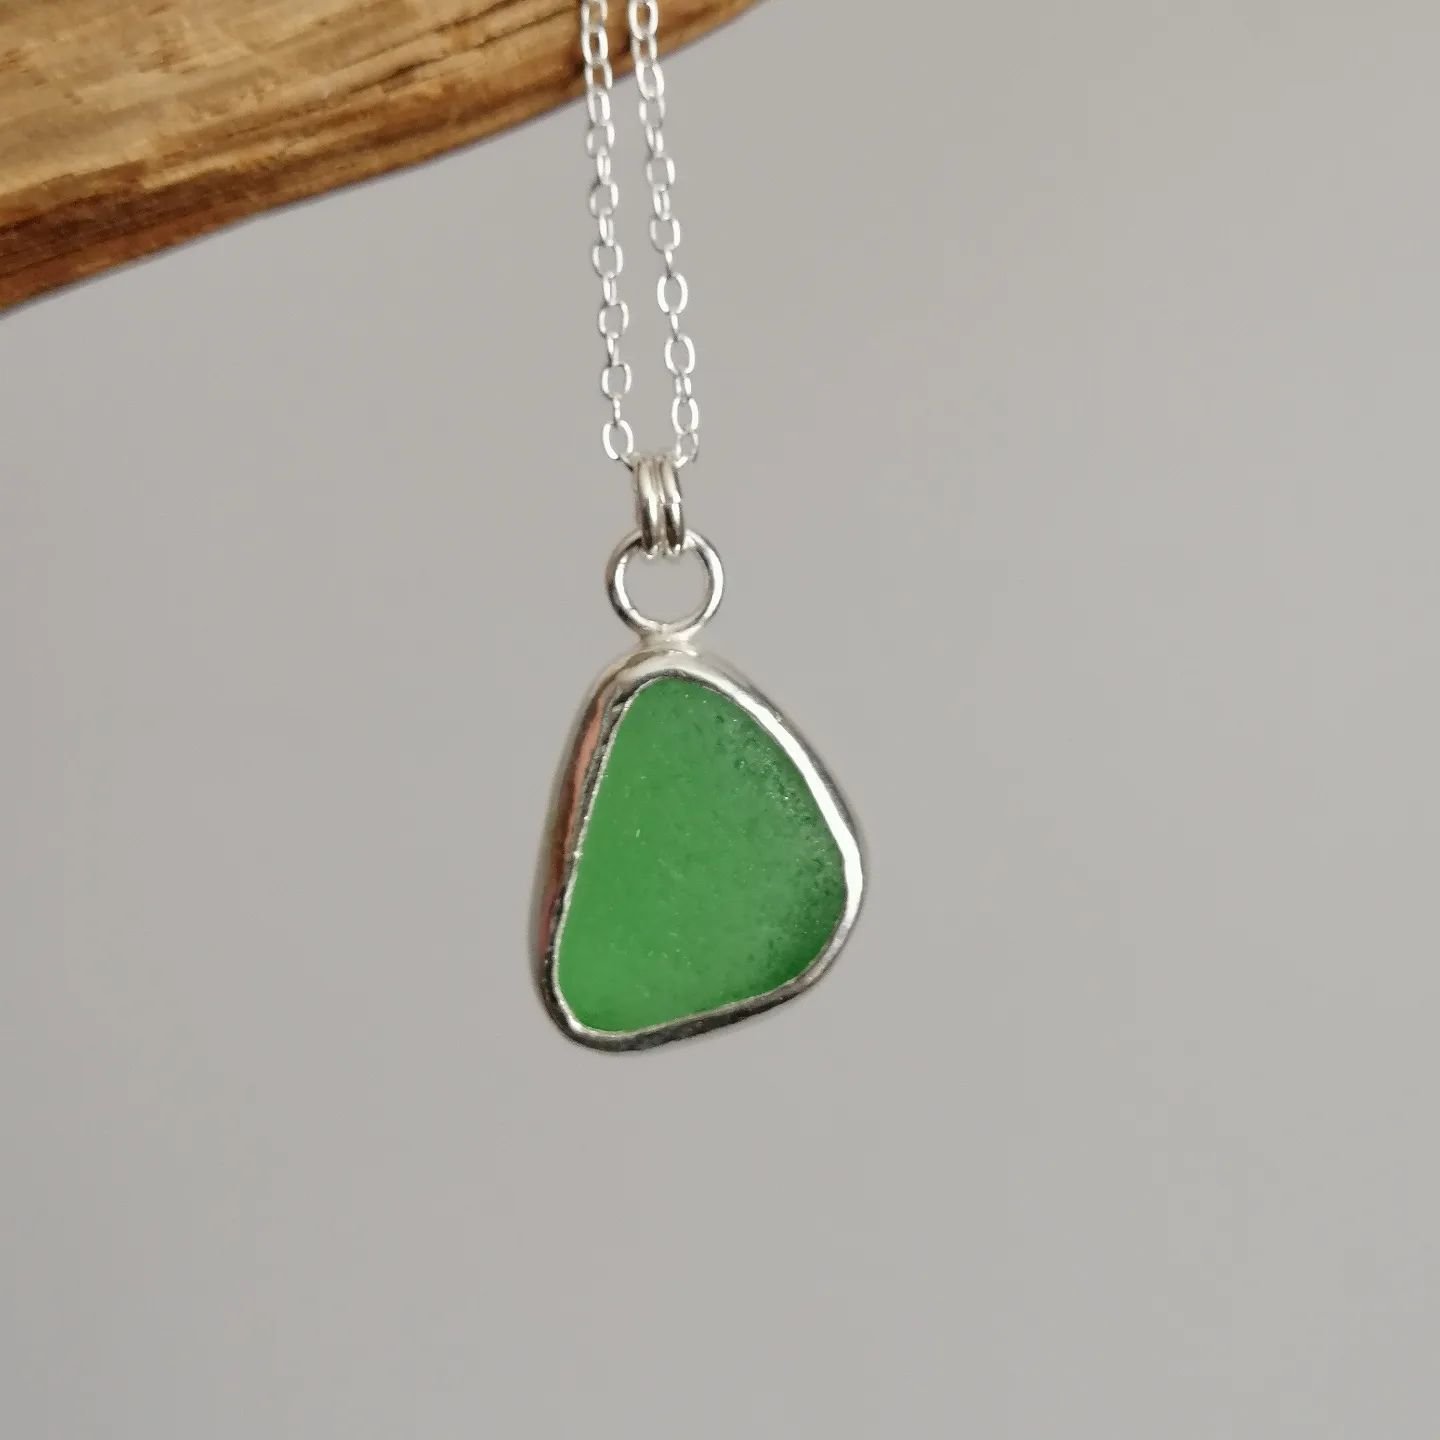 Gorgeous green. I've found so many different shades of green #seaglass when beach walking but I do love the bright rich greens.  The emerald green will always catch my eye first 💕 perfect for #maybirthstone too 🤩

#seaglassnecklace #seaglassjewelle